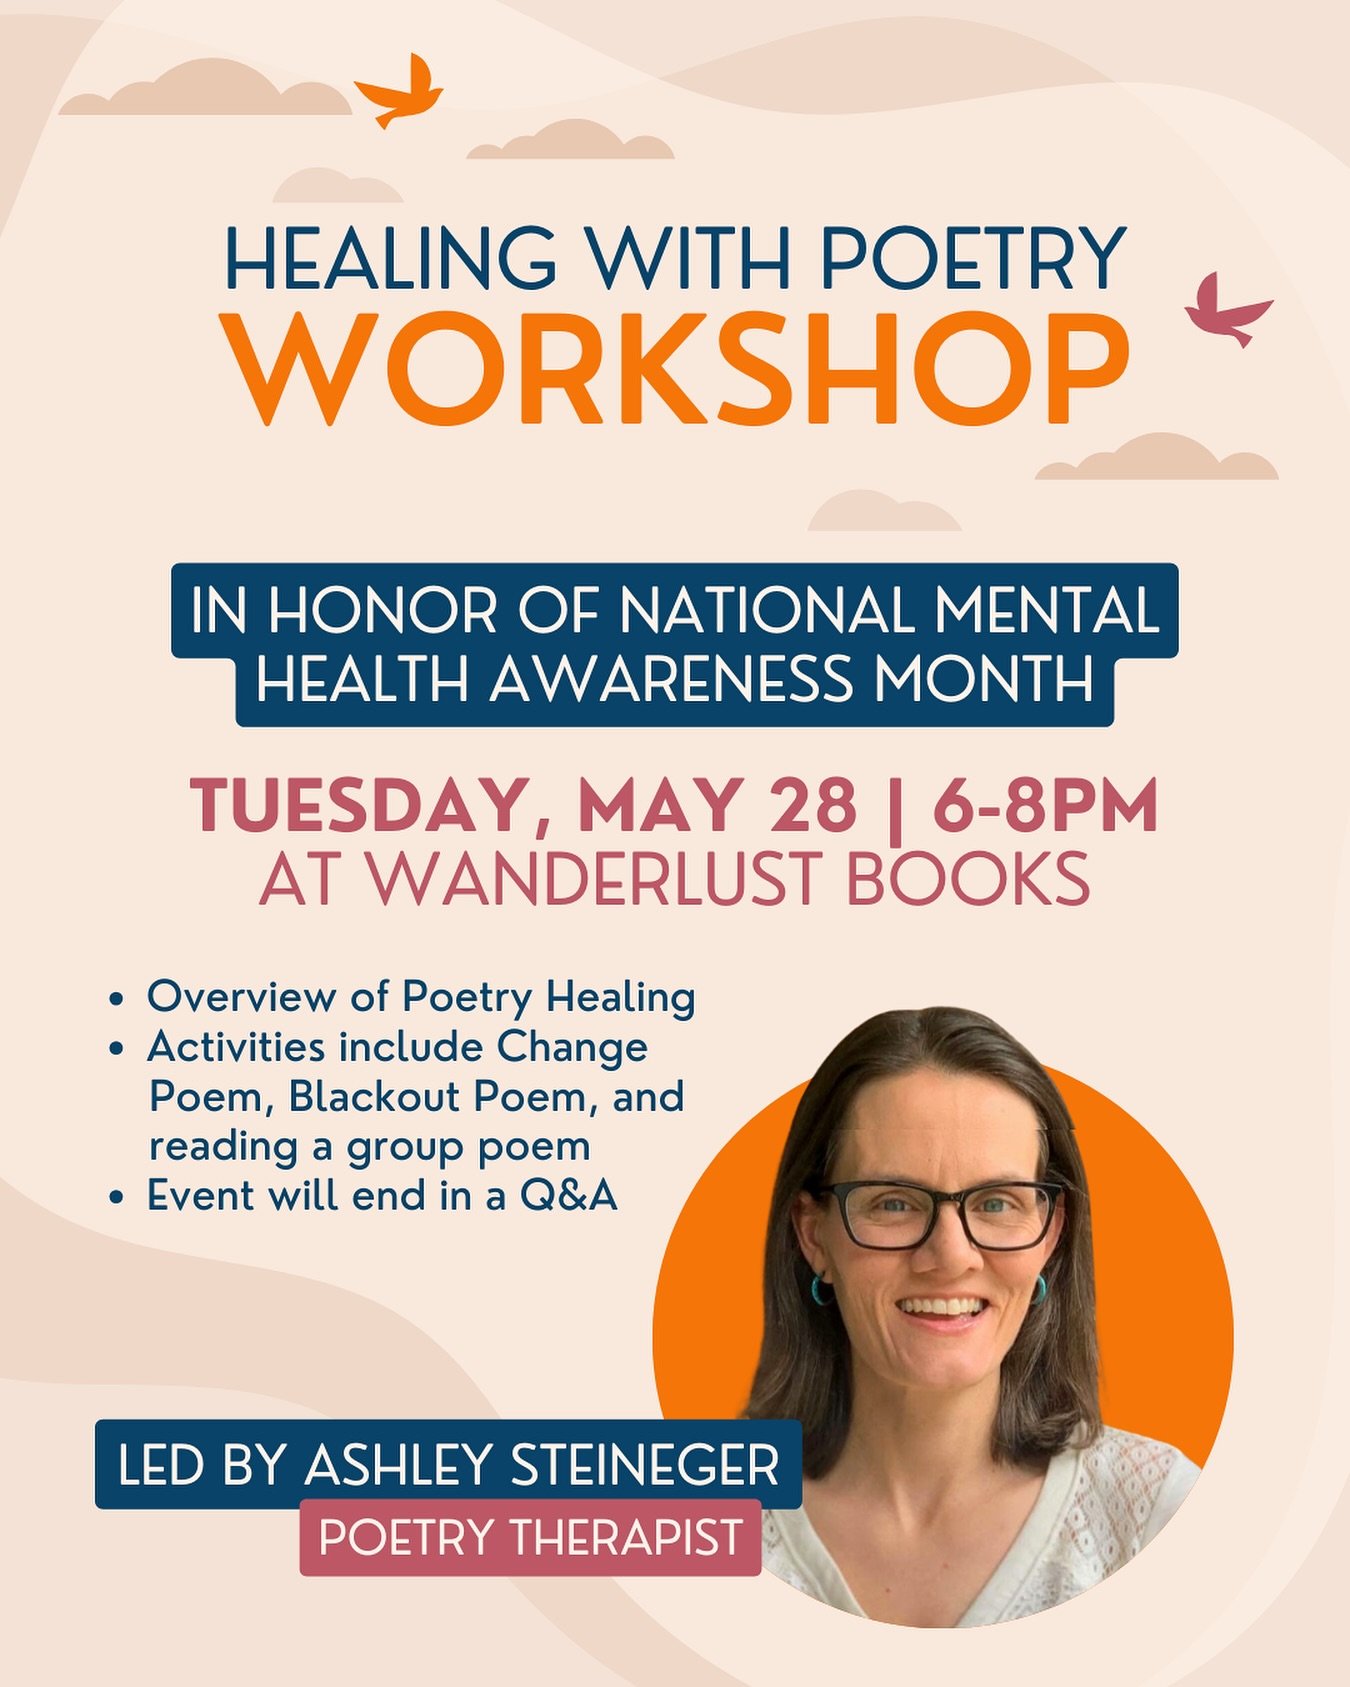 Have you ever wanted to learn about poetry therapy? We are hosting a workshop led by @thepoetrytherapist totally free! Space is limited so please RSVP at the link in bio.